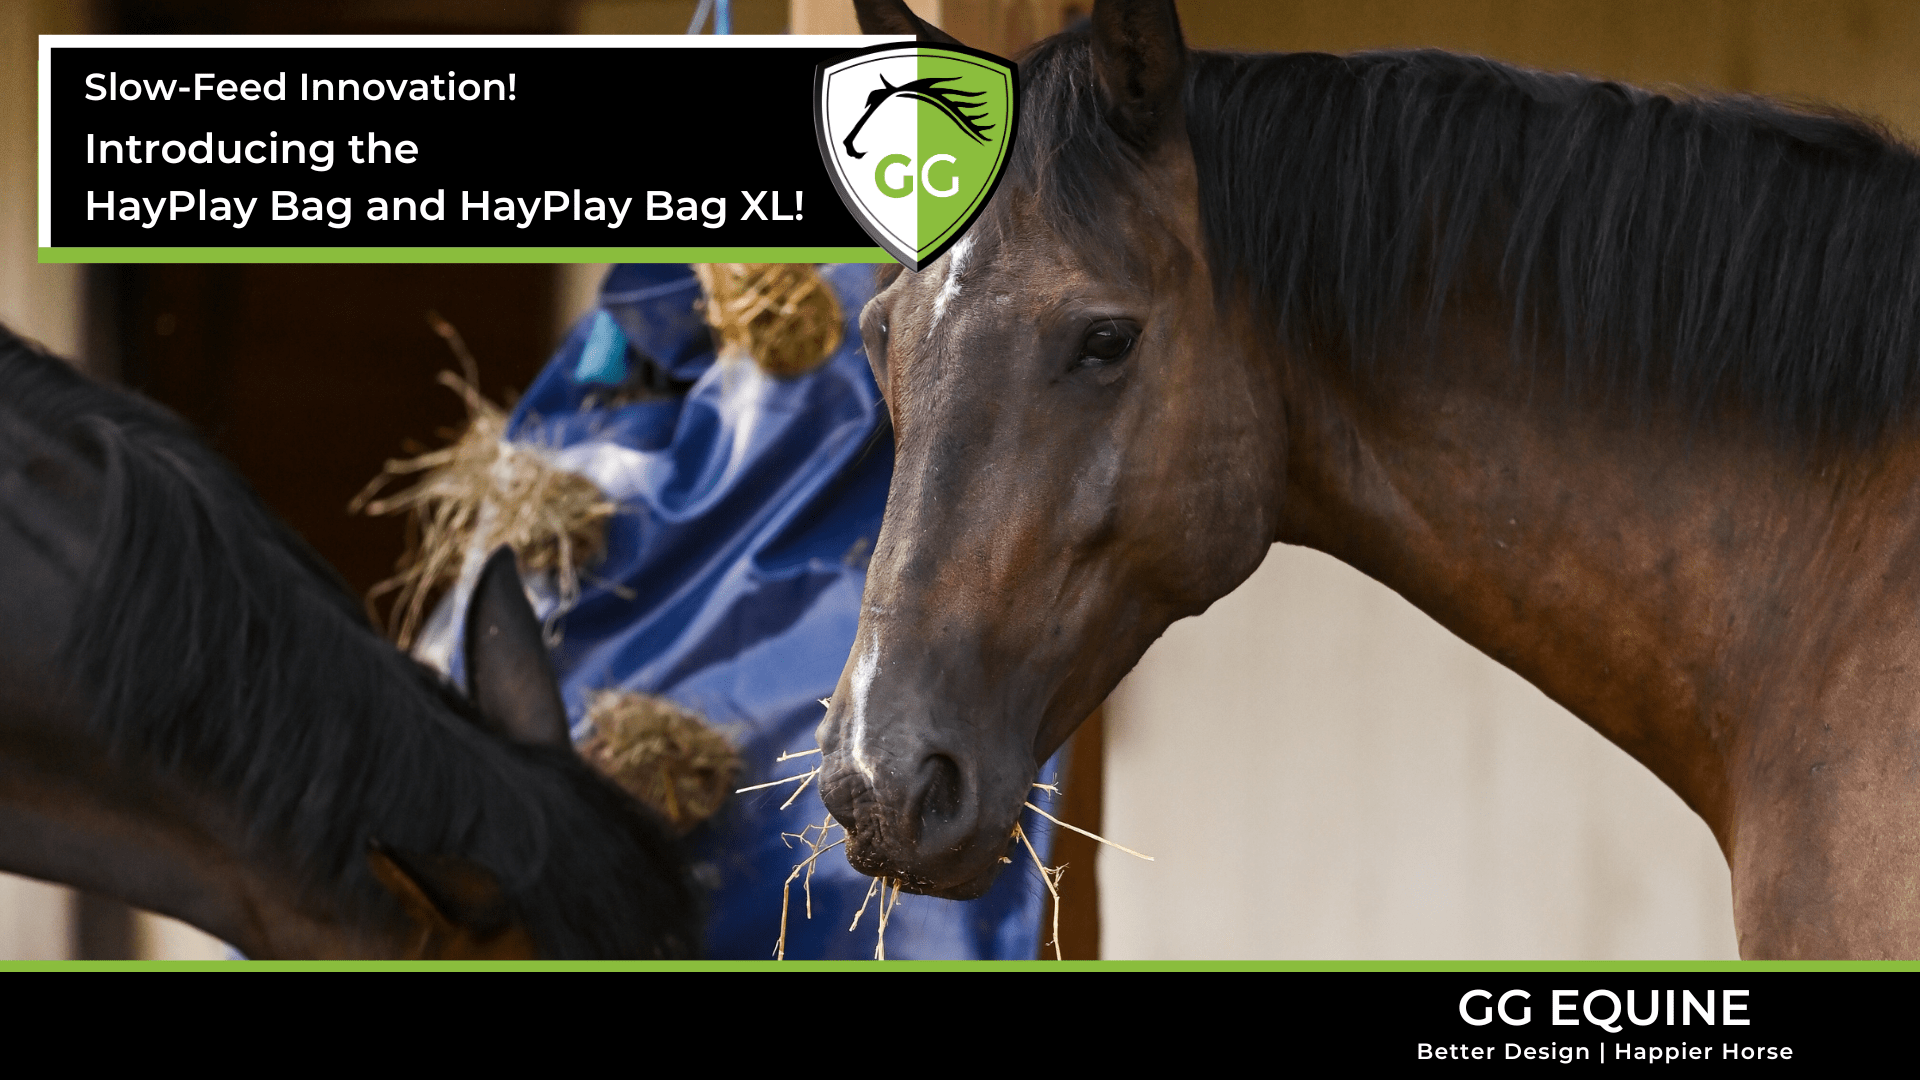 Load video: An introductory look at the features of the HayPlay Bag slow-feeders for horses.